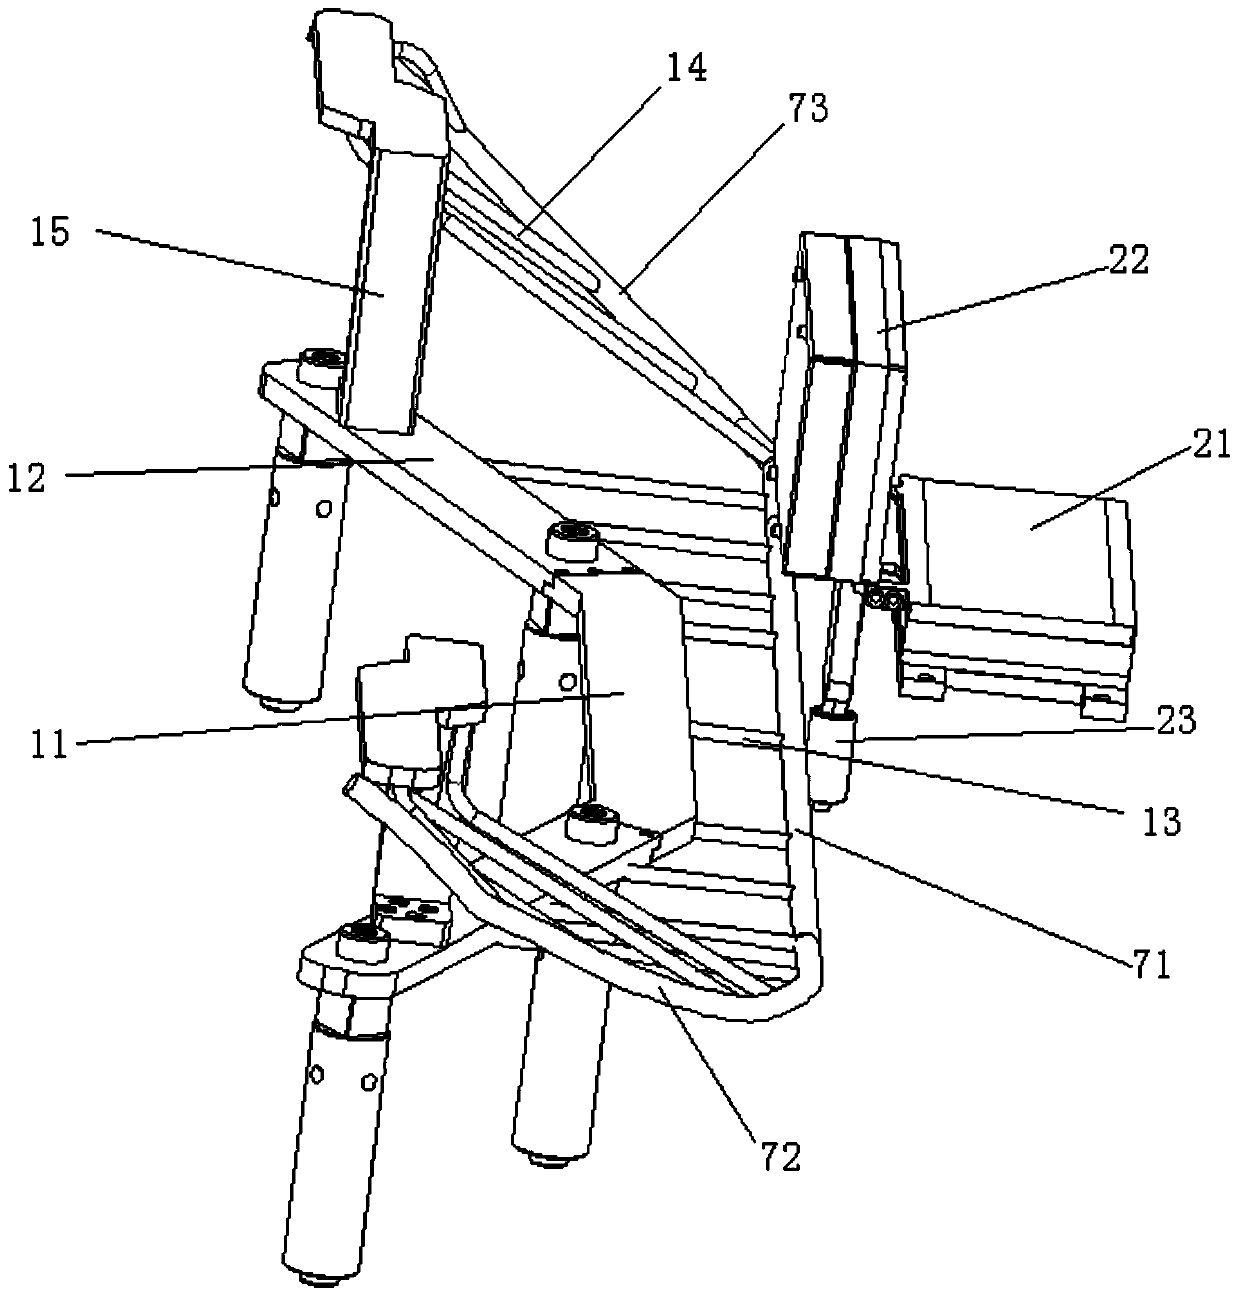 Egg roll processing device